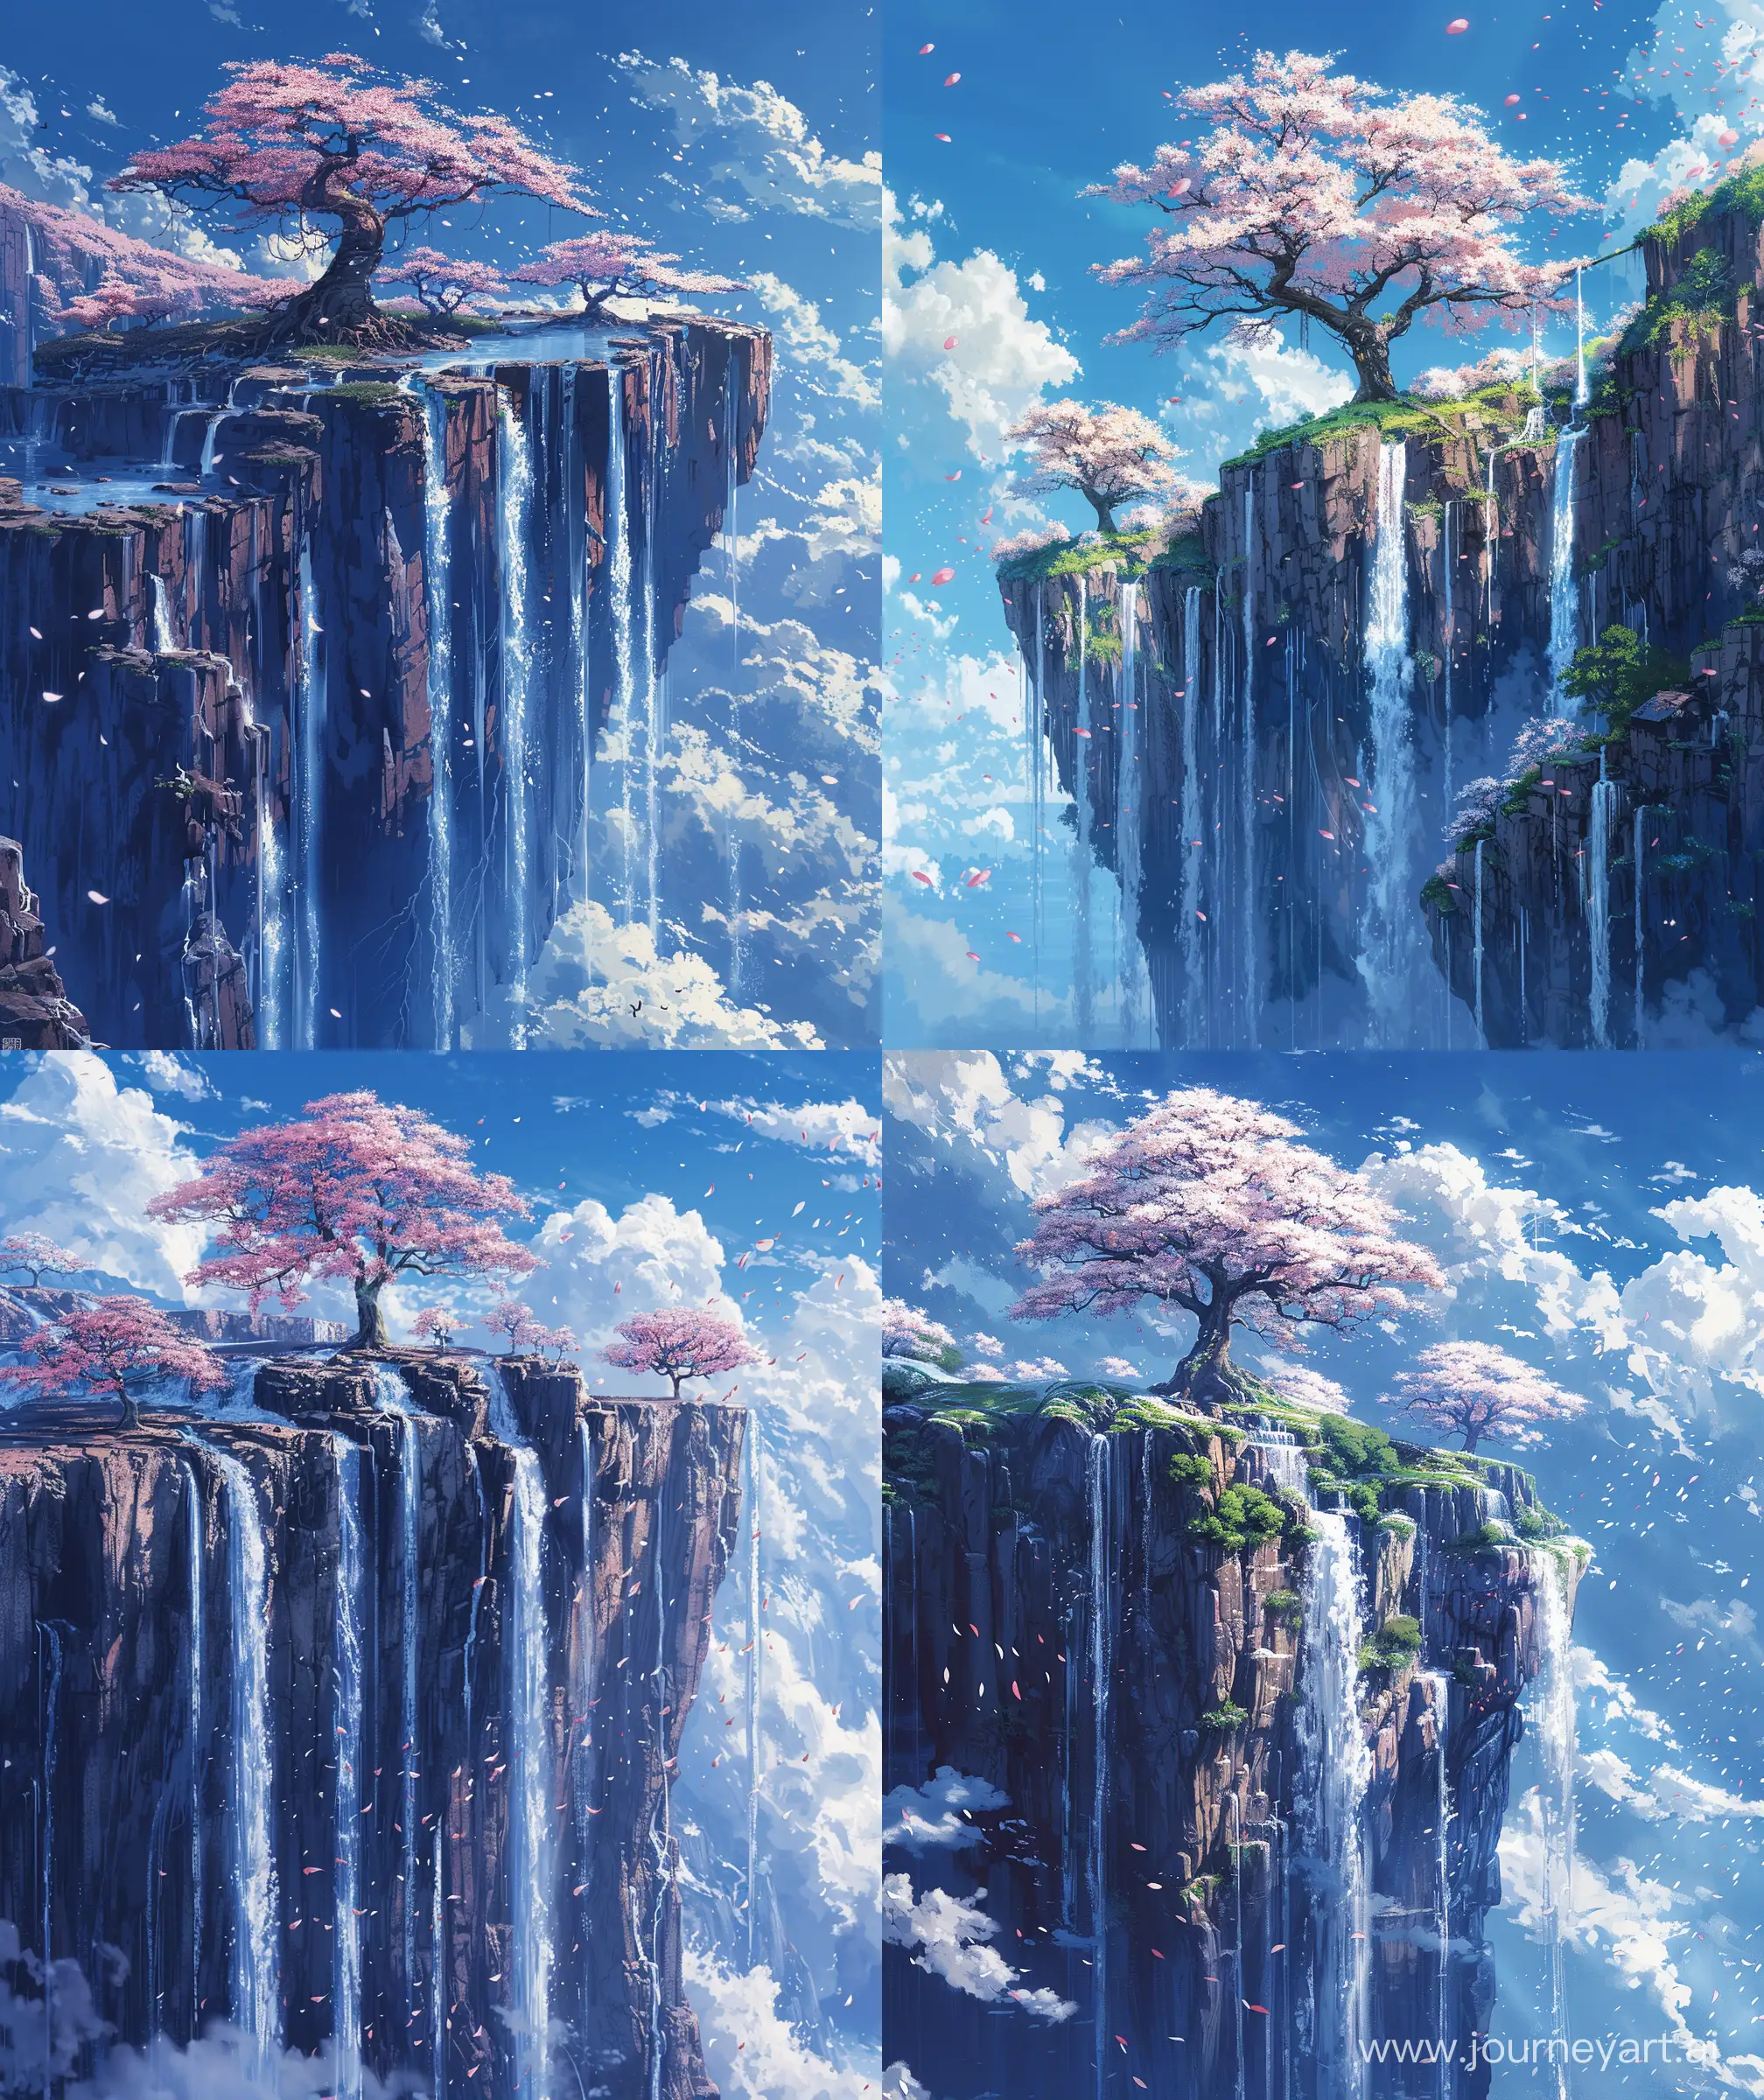 Tranquil-Anime-Scenery-Cherry-Blossom-Cliff-with-Cascading-Waterfalls